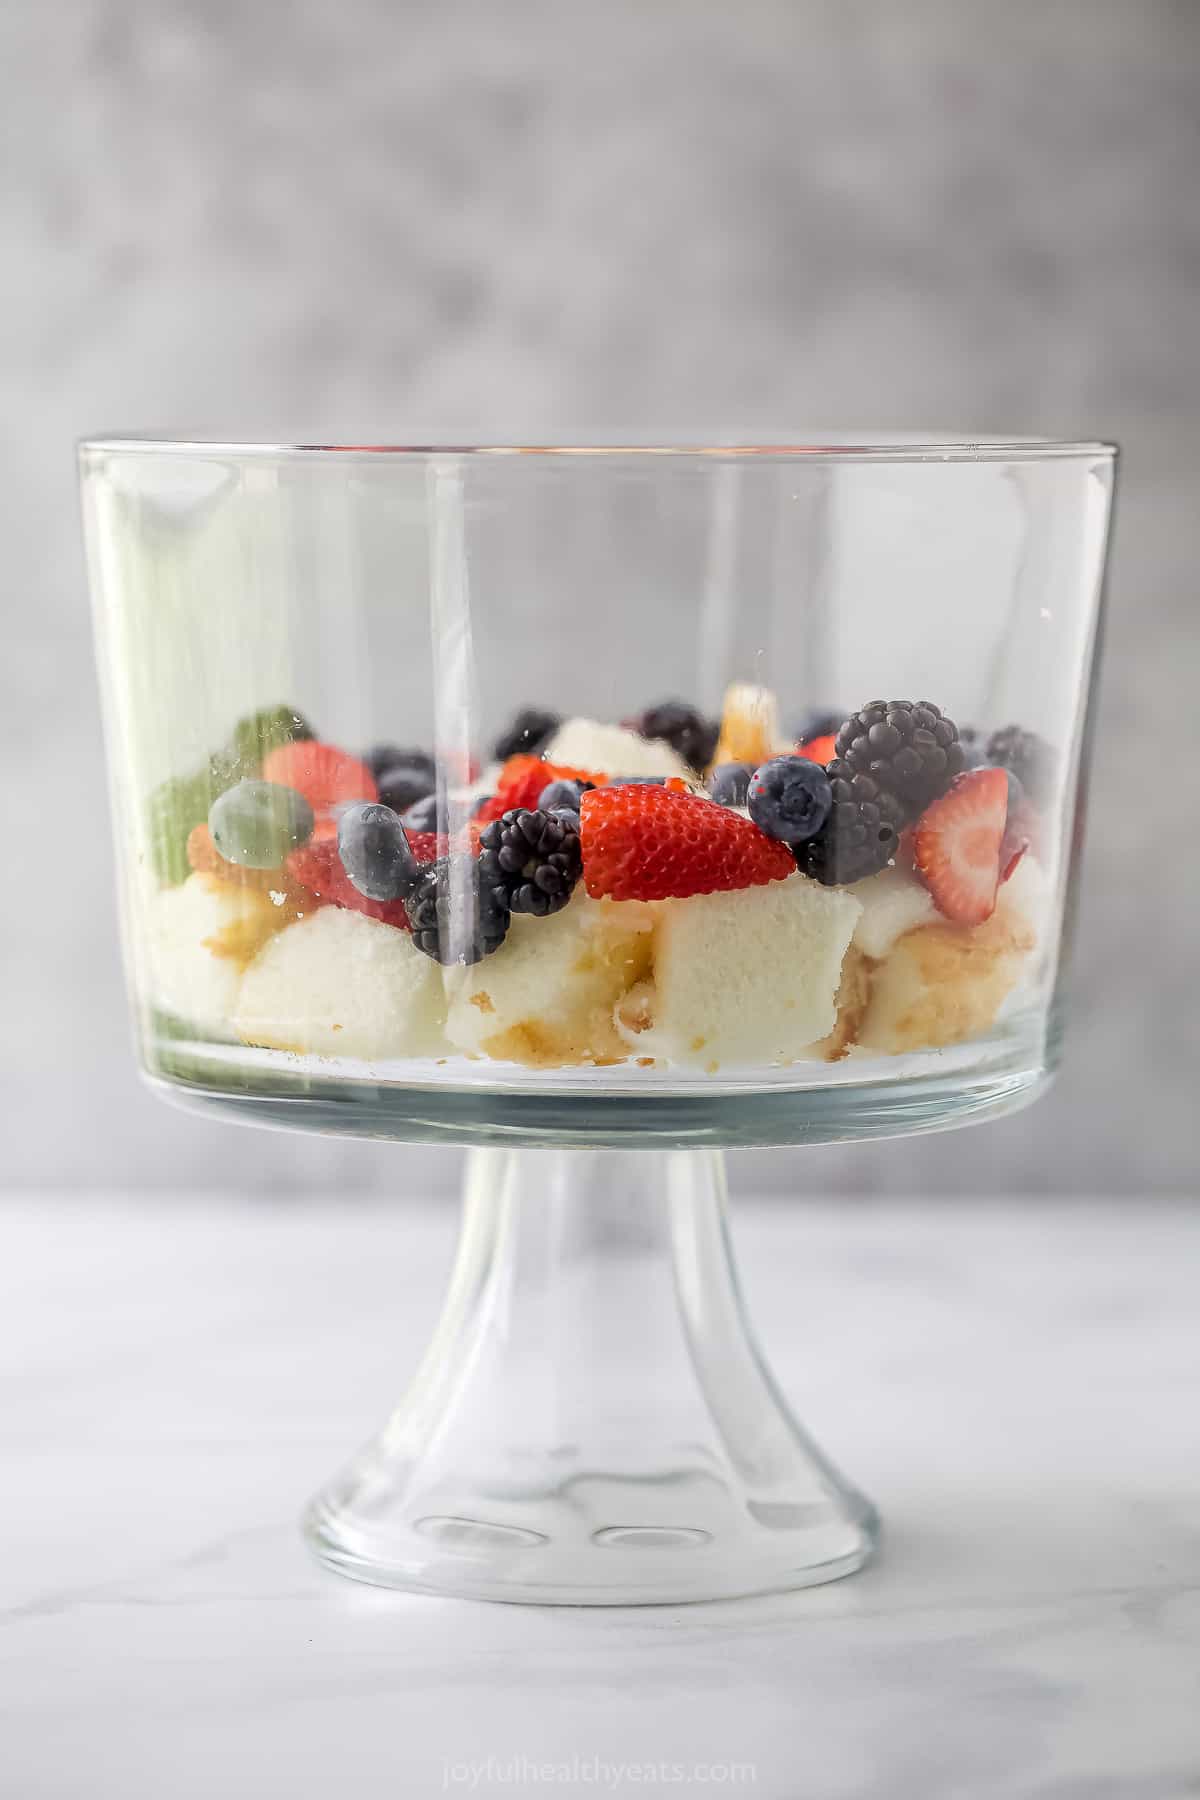 Layers of cubed angel food cake, whipped cream and fresh berries in a large glass dish with a glass base